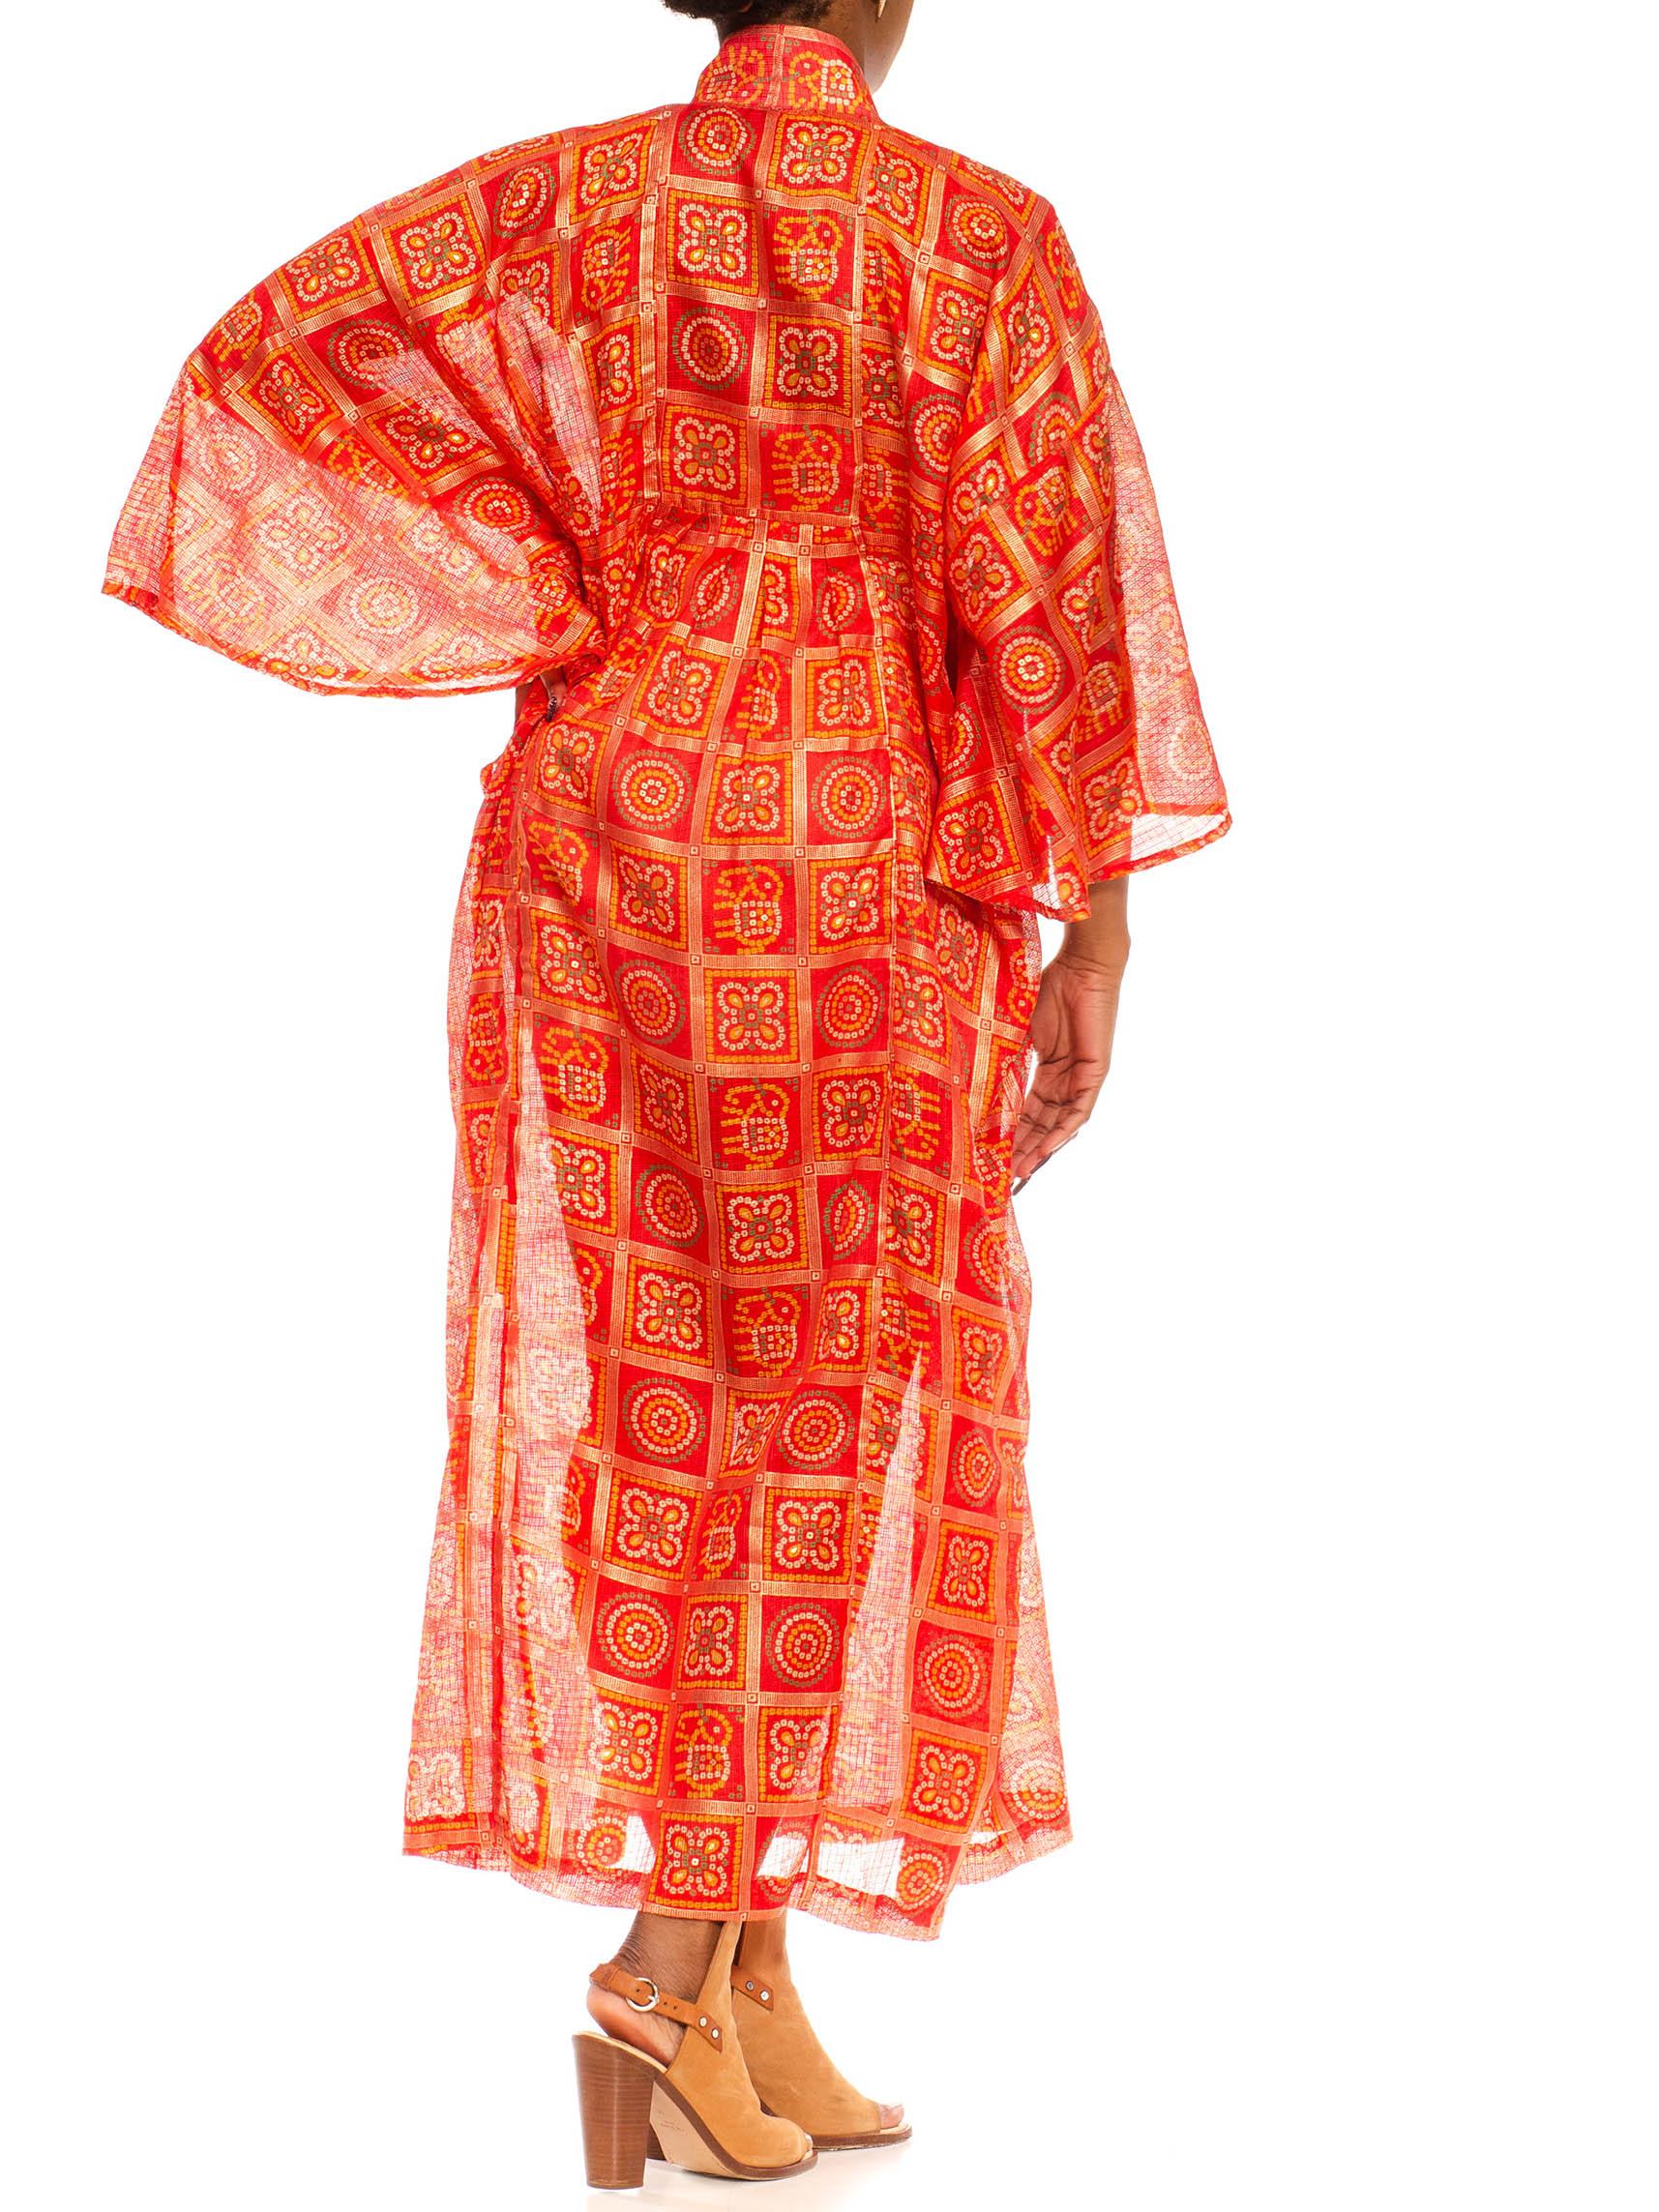 Morphew Collection Red & Gold Polyester Geometric Kaftan Made From Vintage Saris For Sale 6